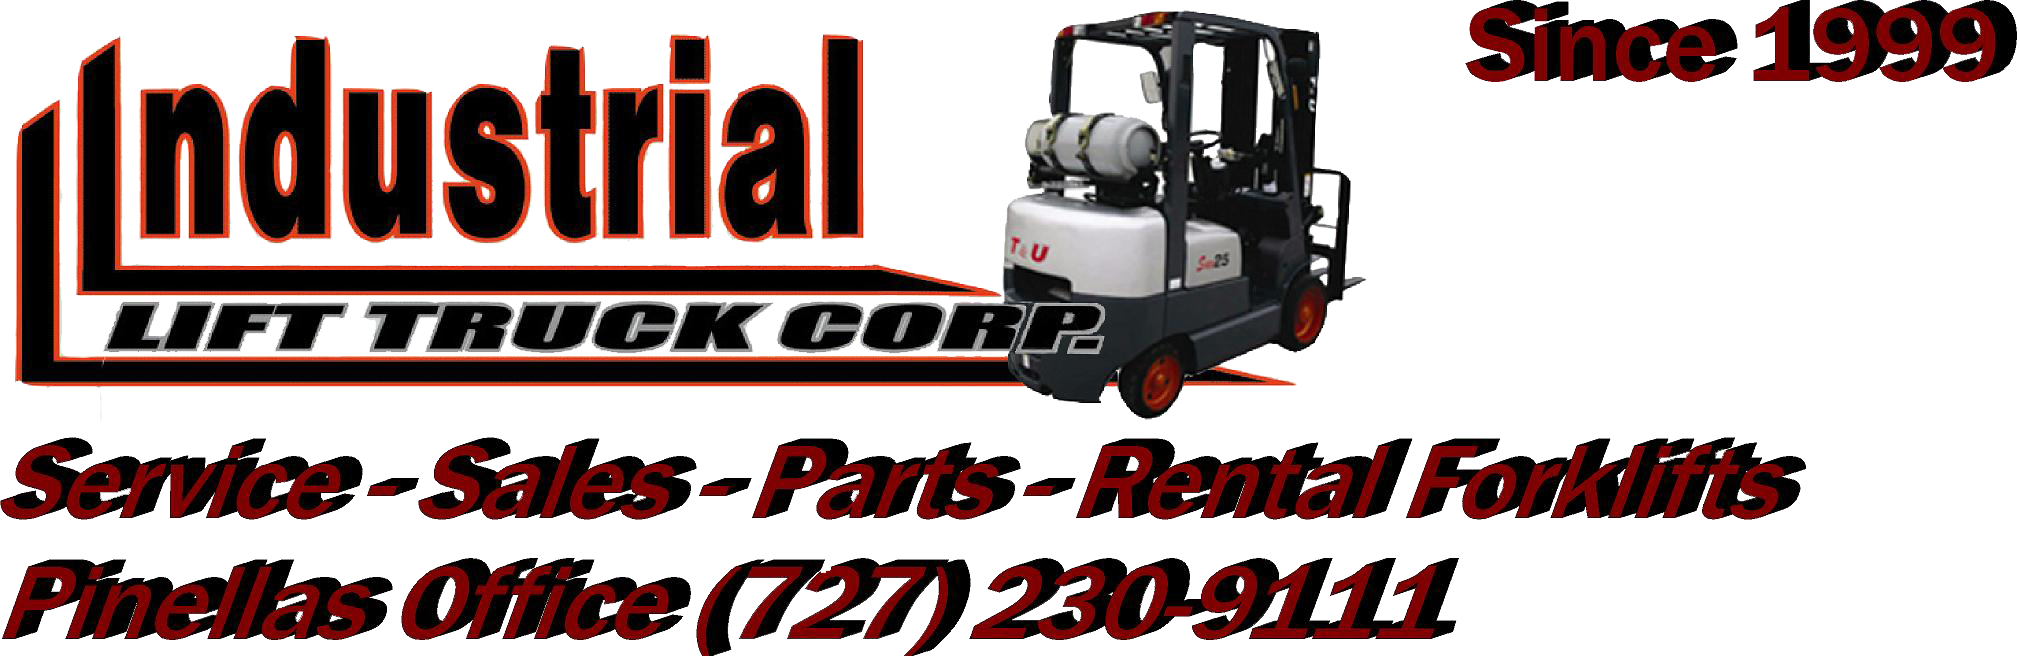 Industrial Lift Truck Corp